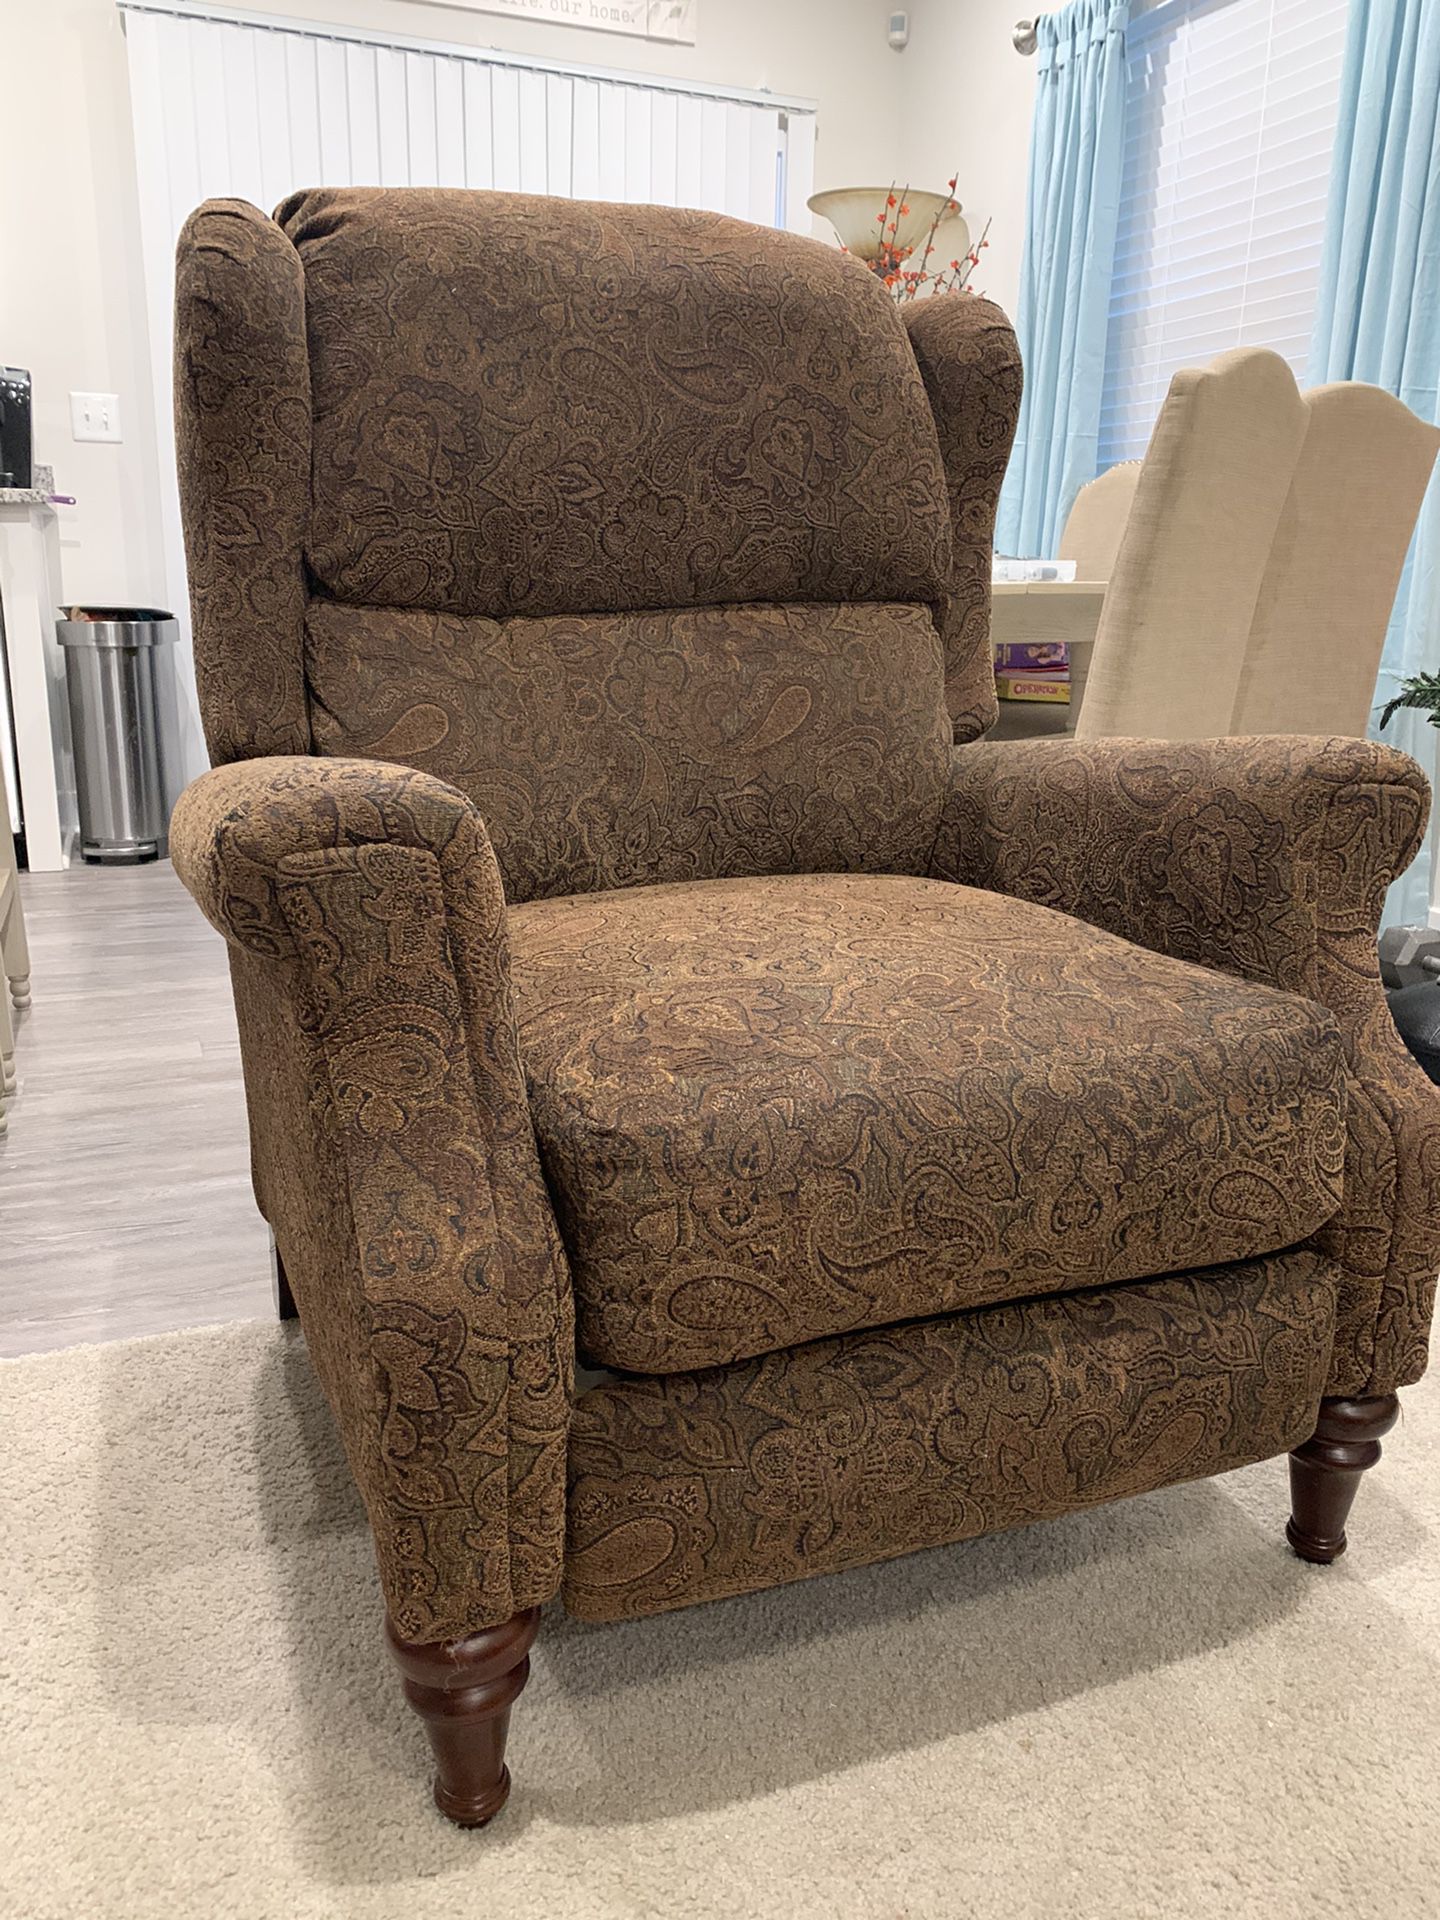 Havertys recliner chairs - 2 available